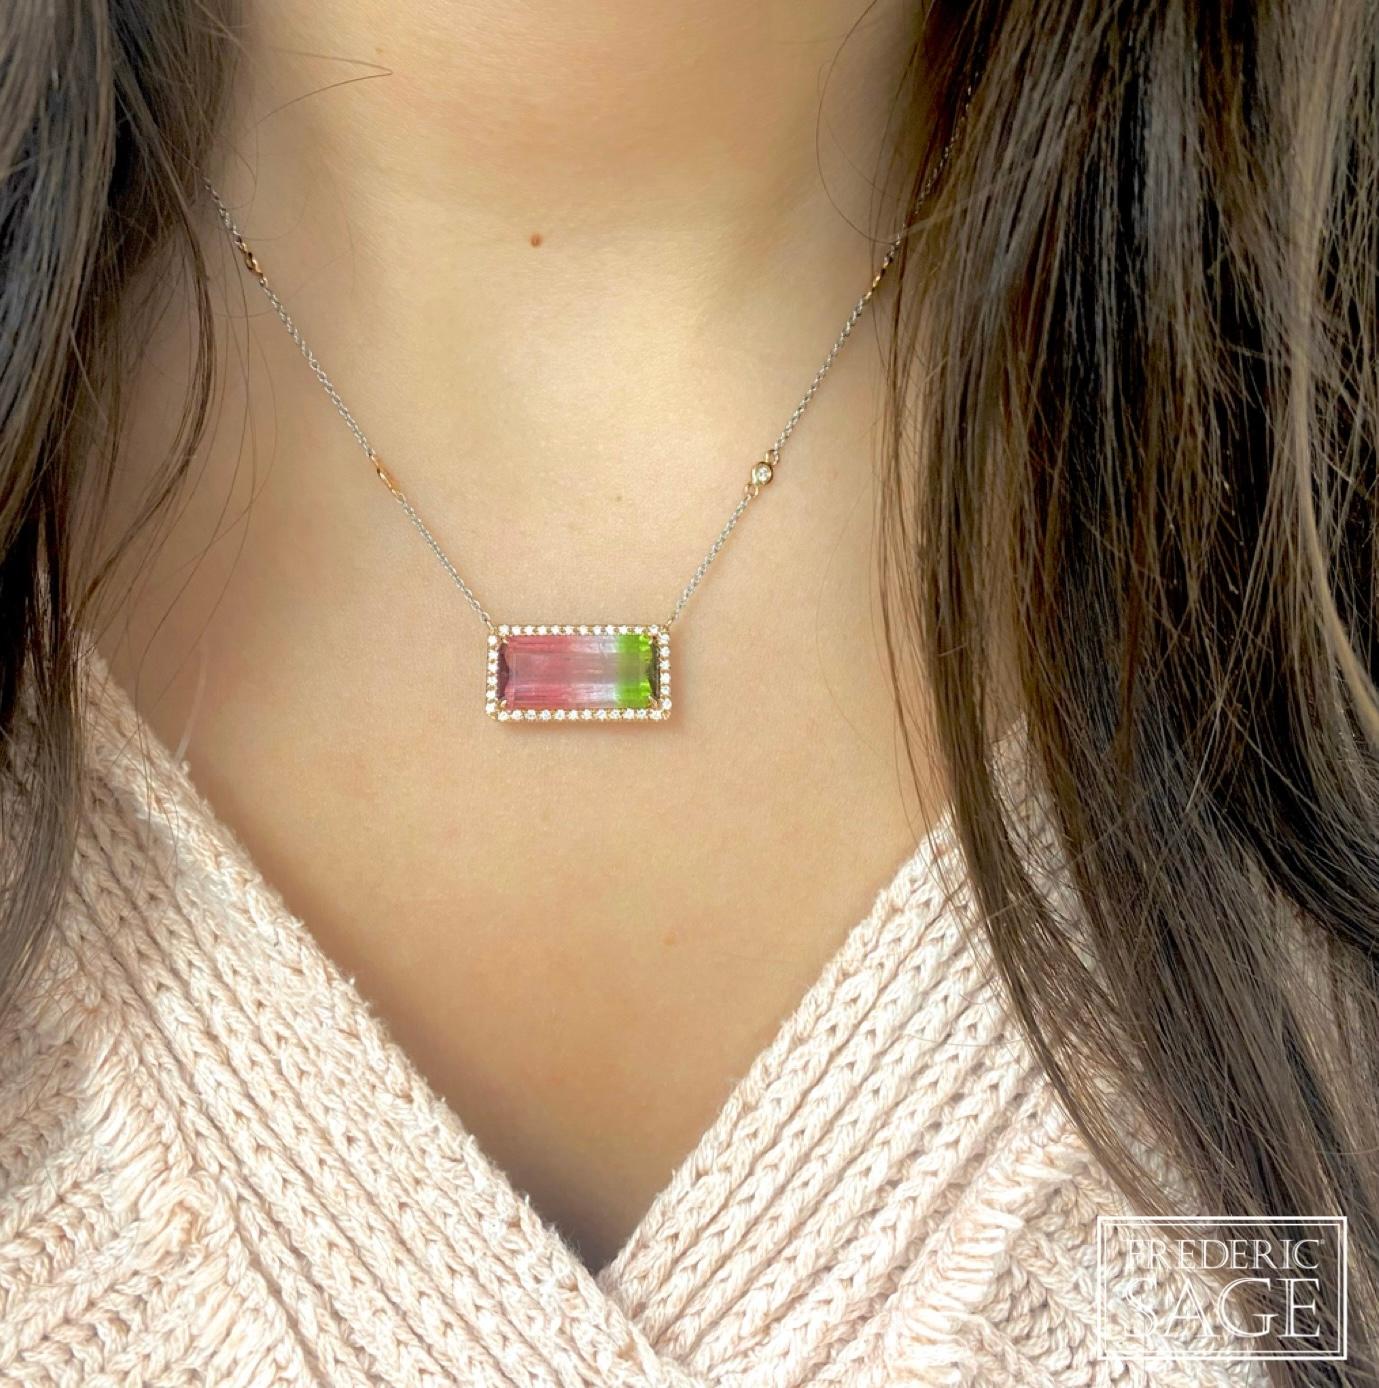 Large Emerald Cut Bi – Color Watermelon Tourmaline & Diamond Halo With Chain, Tourmaline 7.32 Ct, Diamond 0.40 Ct, approximately 22 mm x 12 mm

Available in other metal/ gemstone options: These Gemstone pieces can be made in white, pink, yellow gold